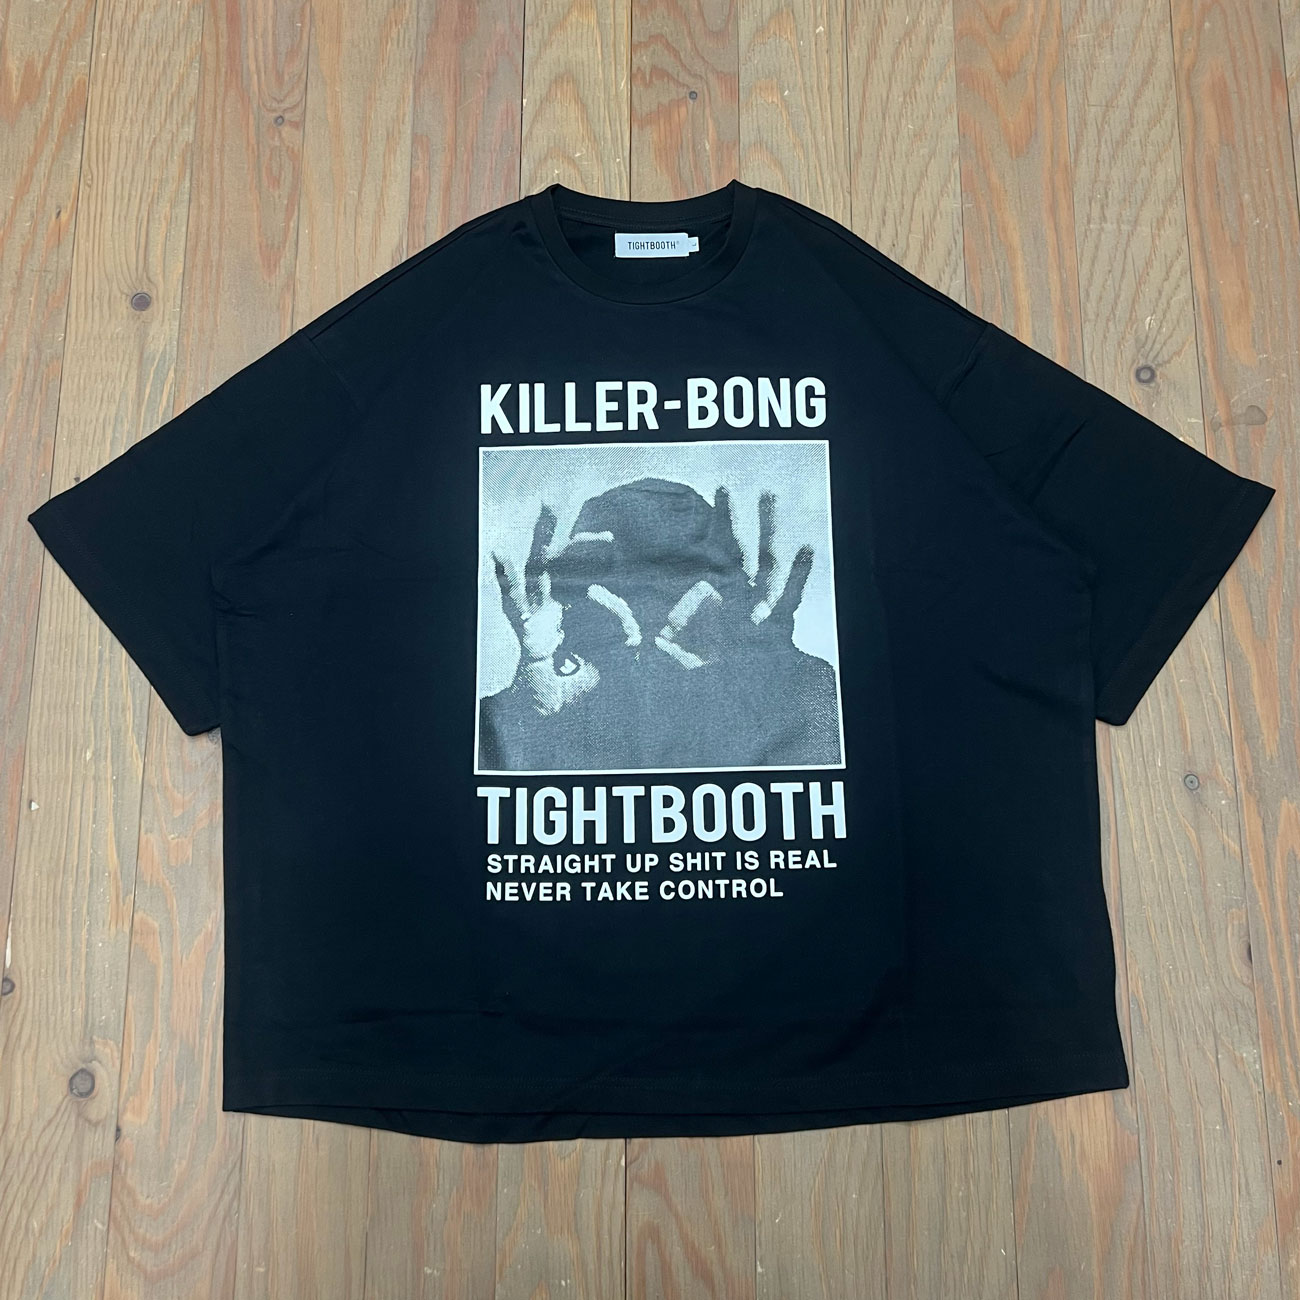 TIGHTBOOTH HAND SIGN T-SHIRT